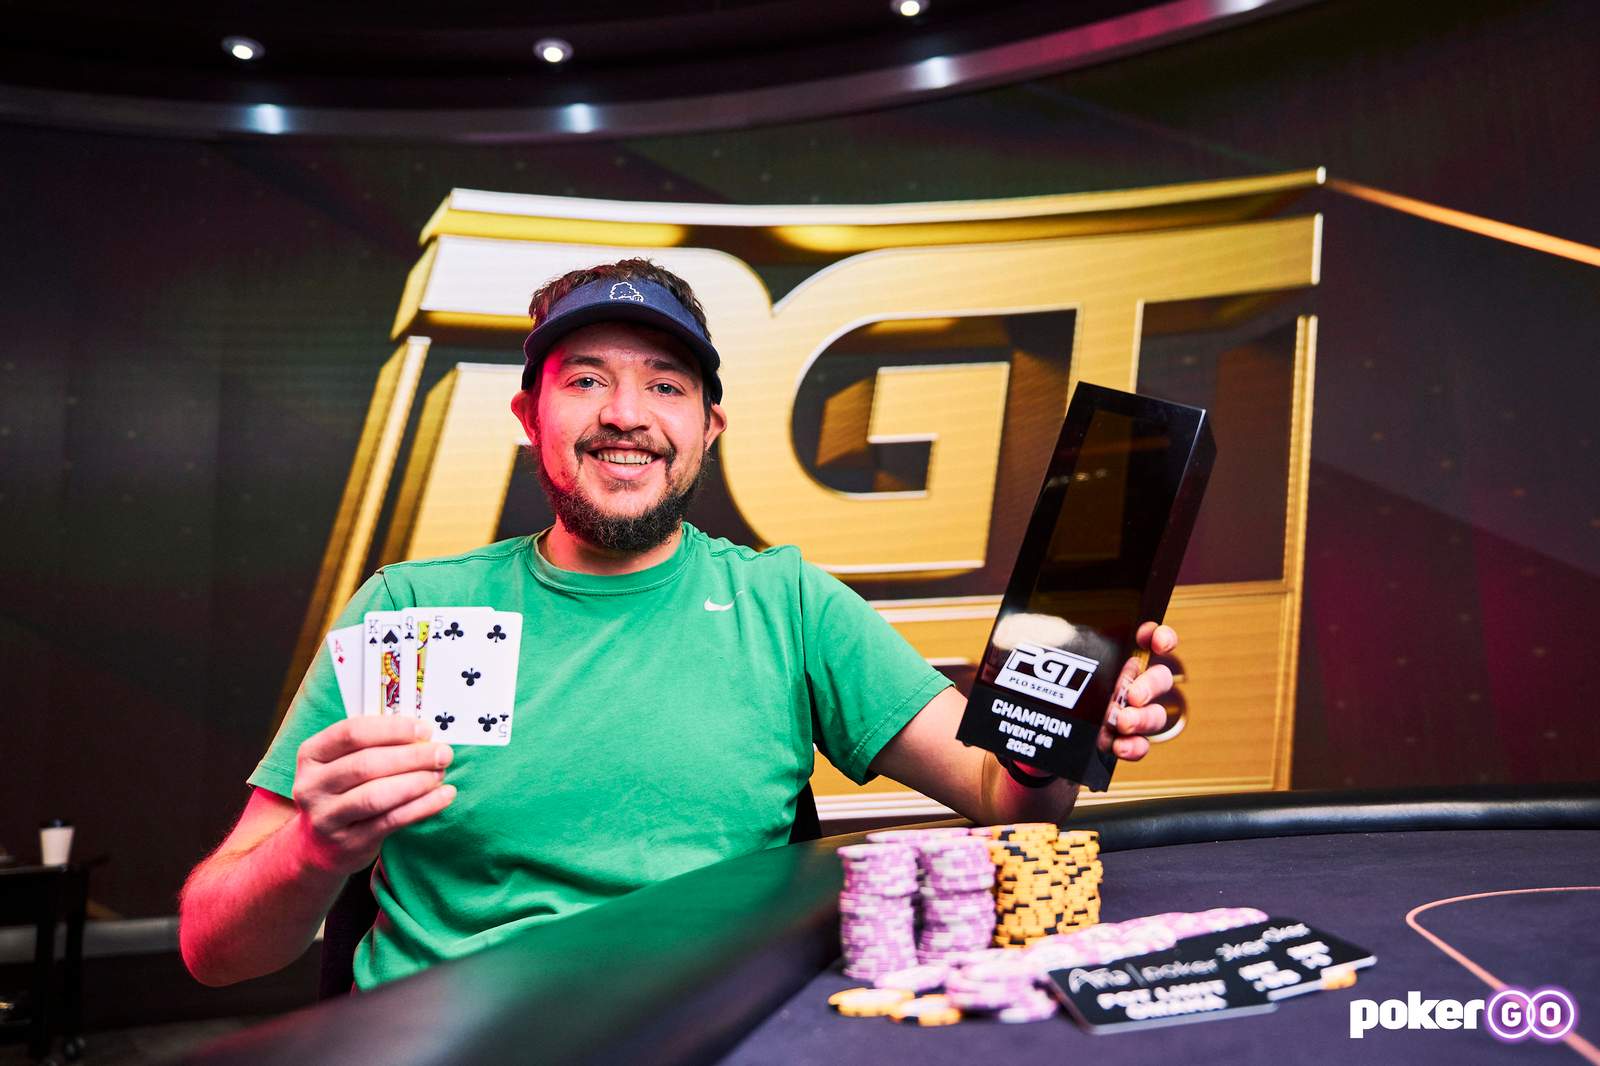 Jim Collopy Wins PGT PLO Series Event #6: $10,000 Mixed PLO / PLO8 / Big O for $206,400